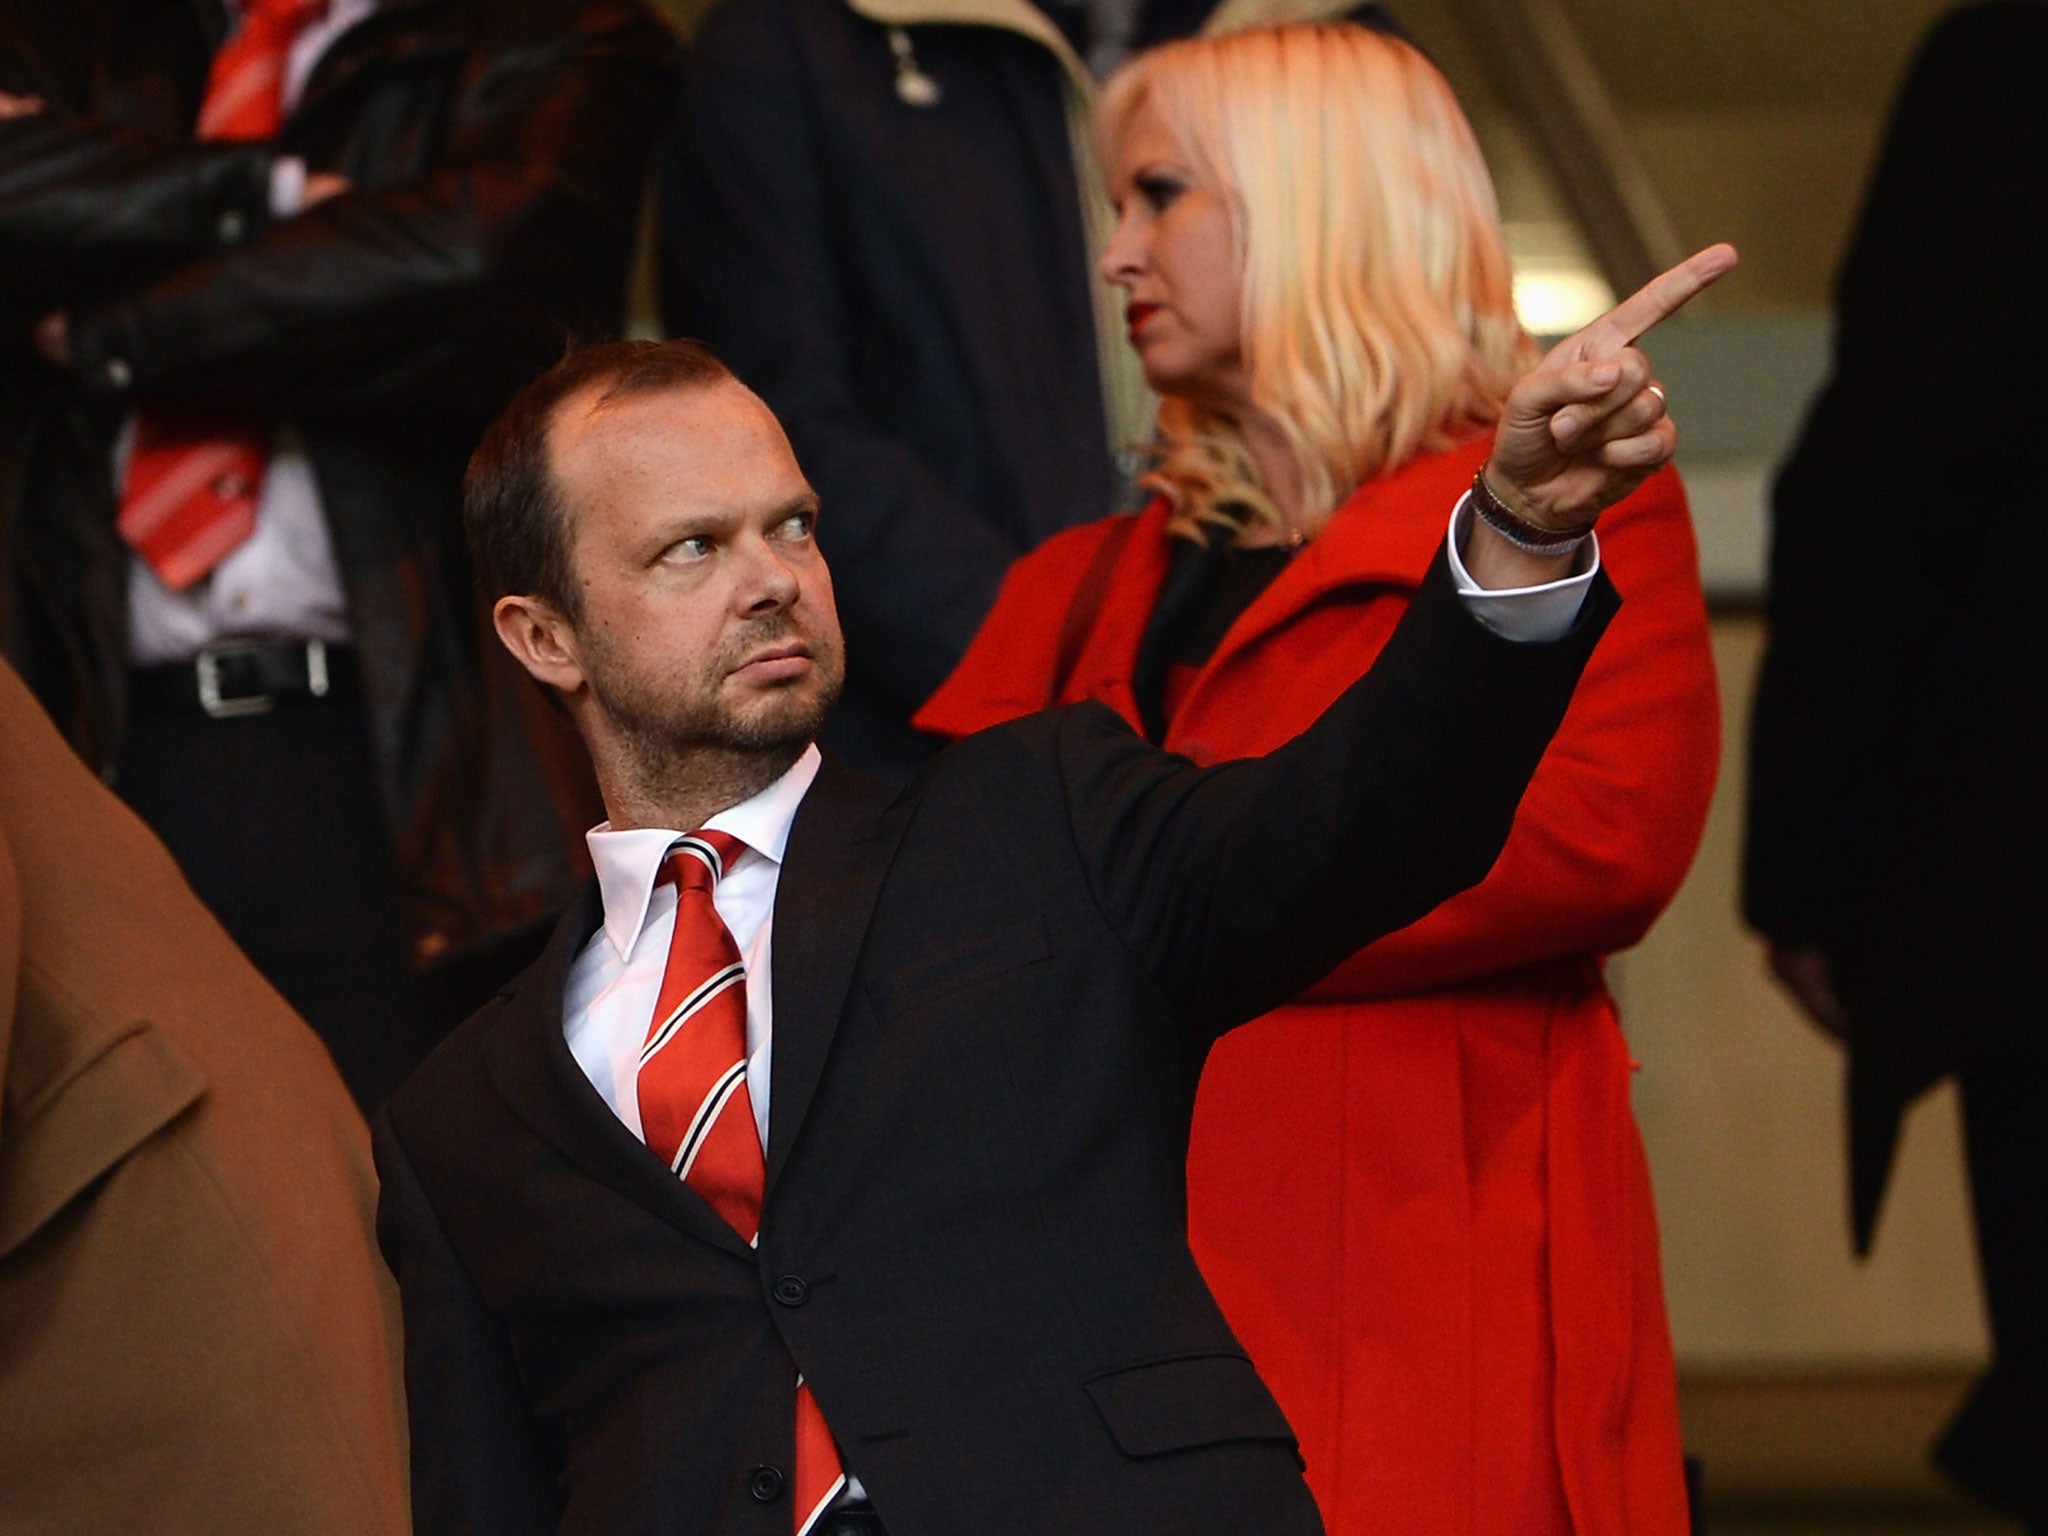 Manchester United supporters were unhappy at the perception that executive vice-chairman Ed Woodward had been 'used' by Ramos to get more money